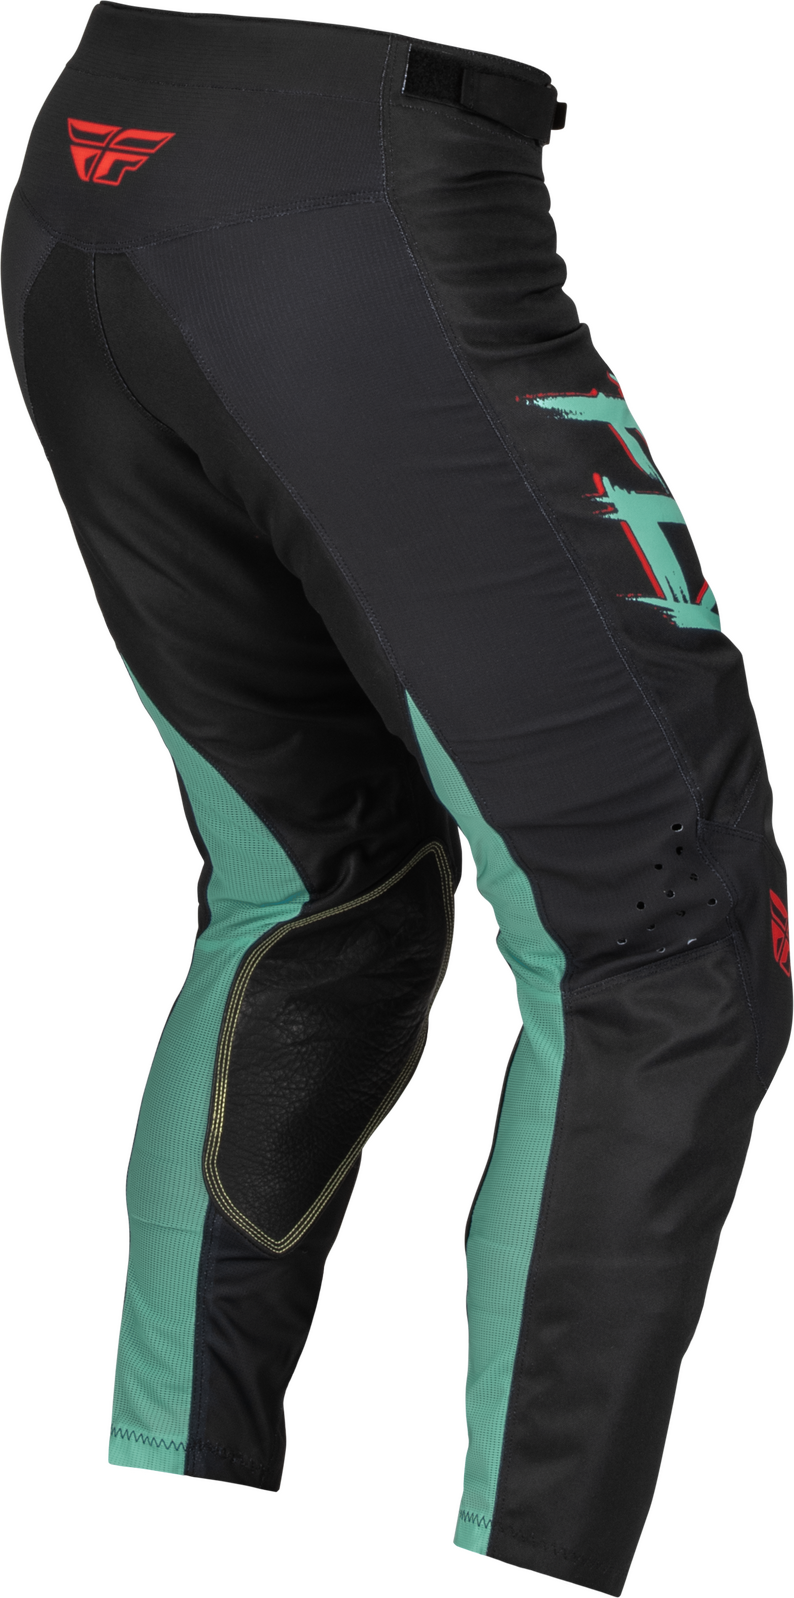 FLY 2023 Special Edition Kinetic Rave Black/Mint/Red Pants - FLY Racing